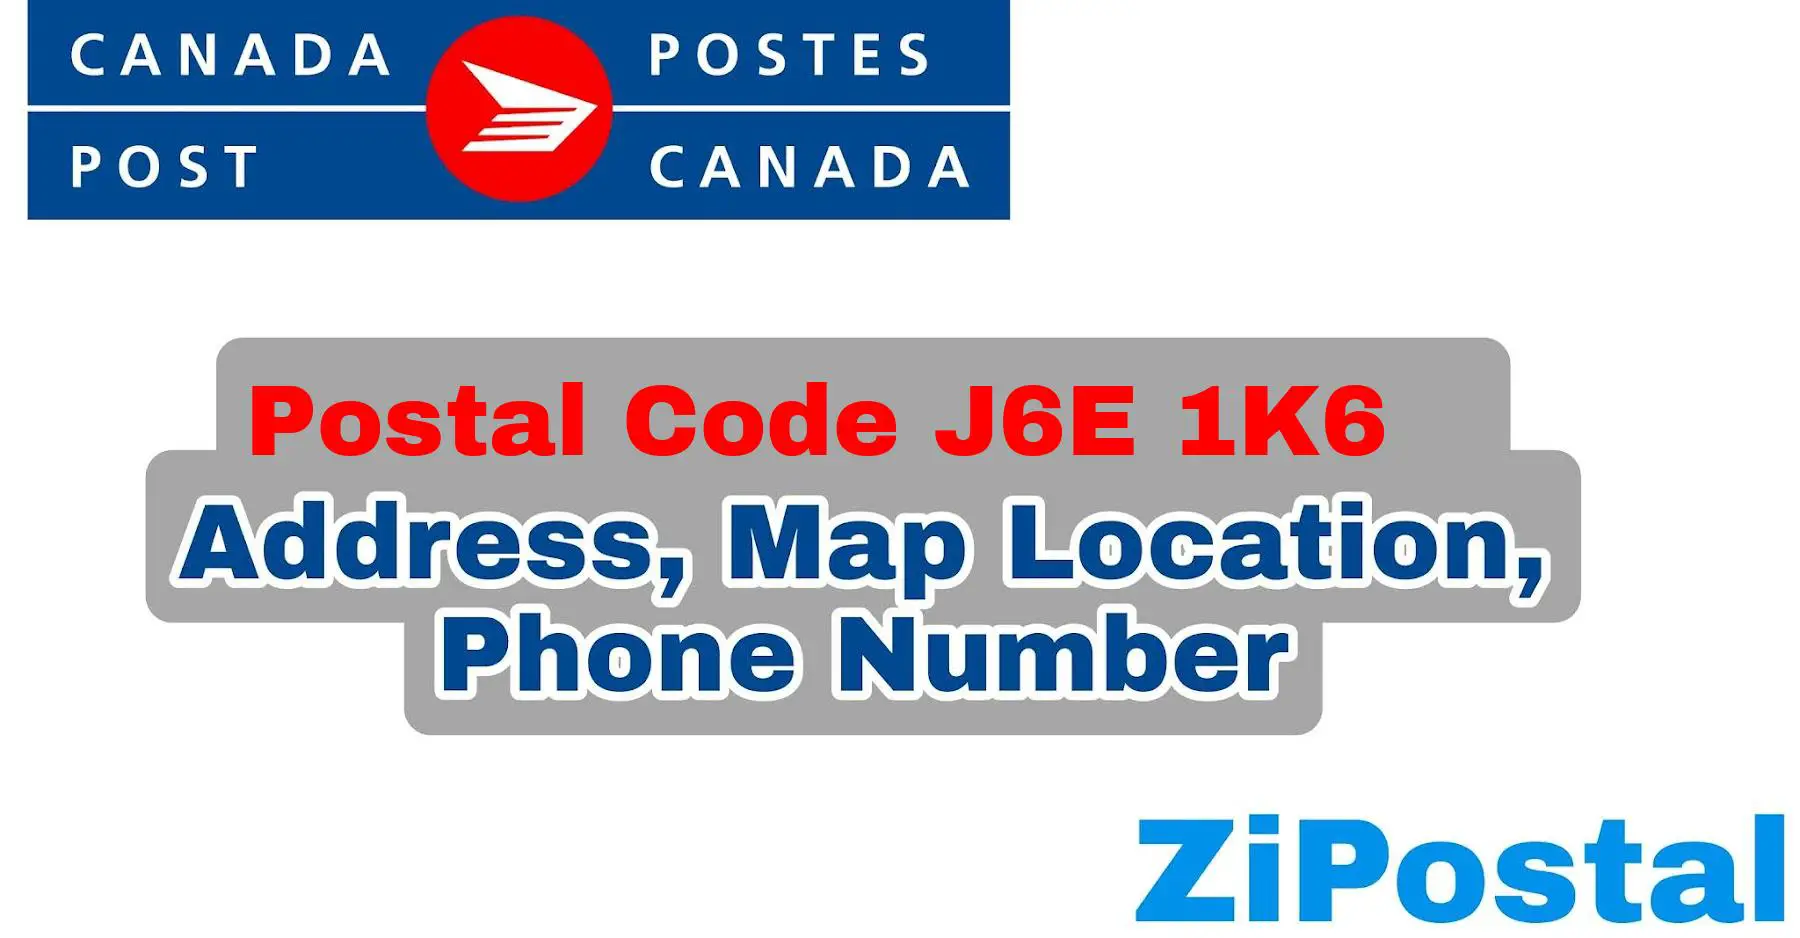 Postal Code J6E 1K6 Address Map Location and Phone Number